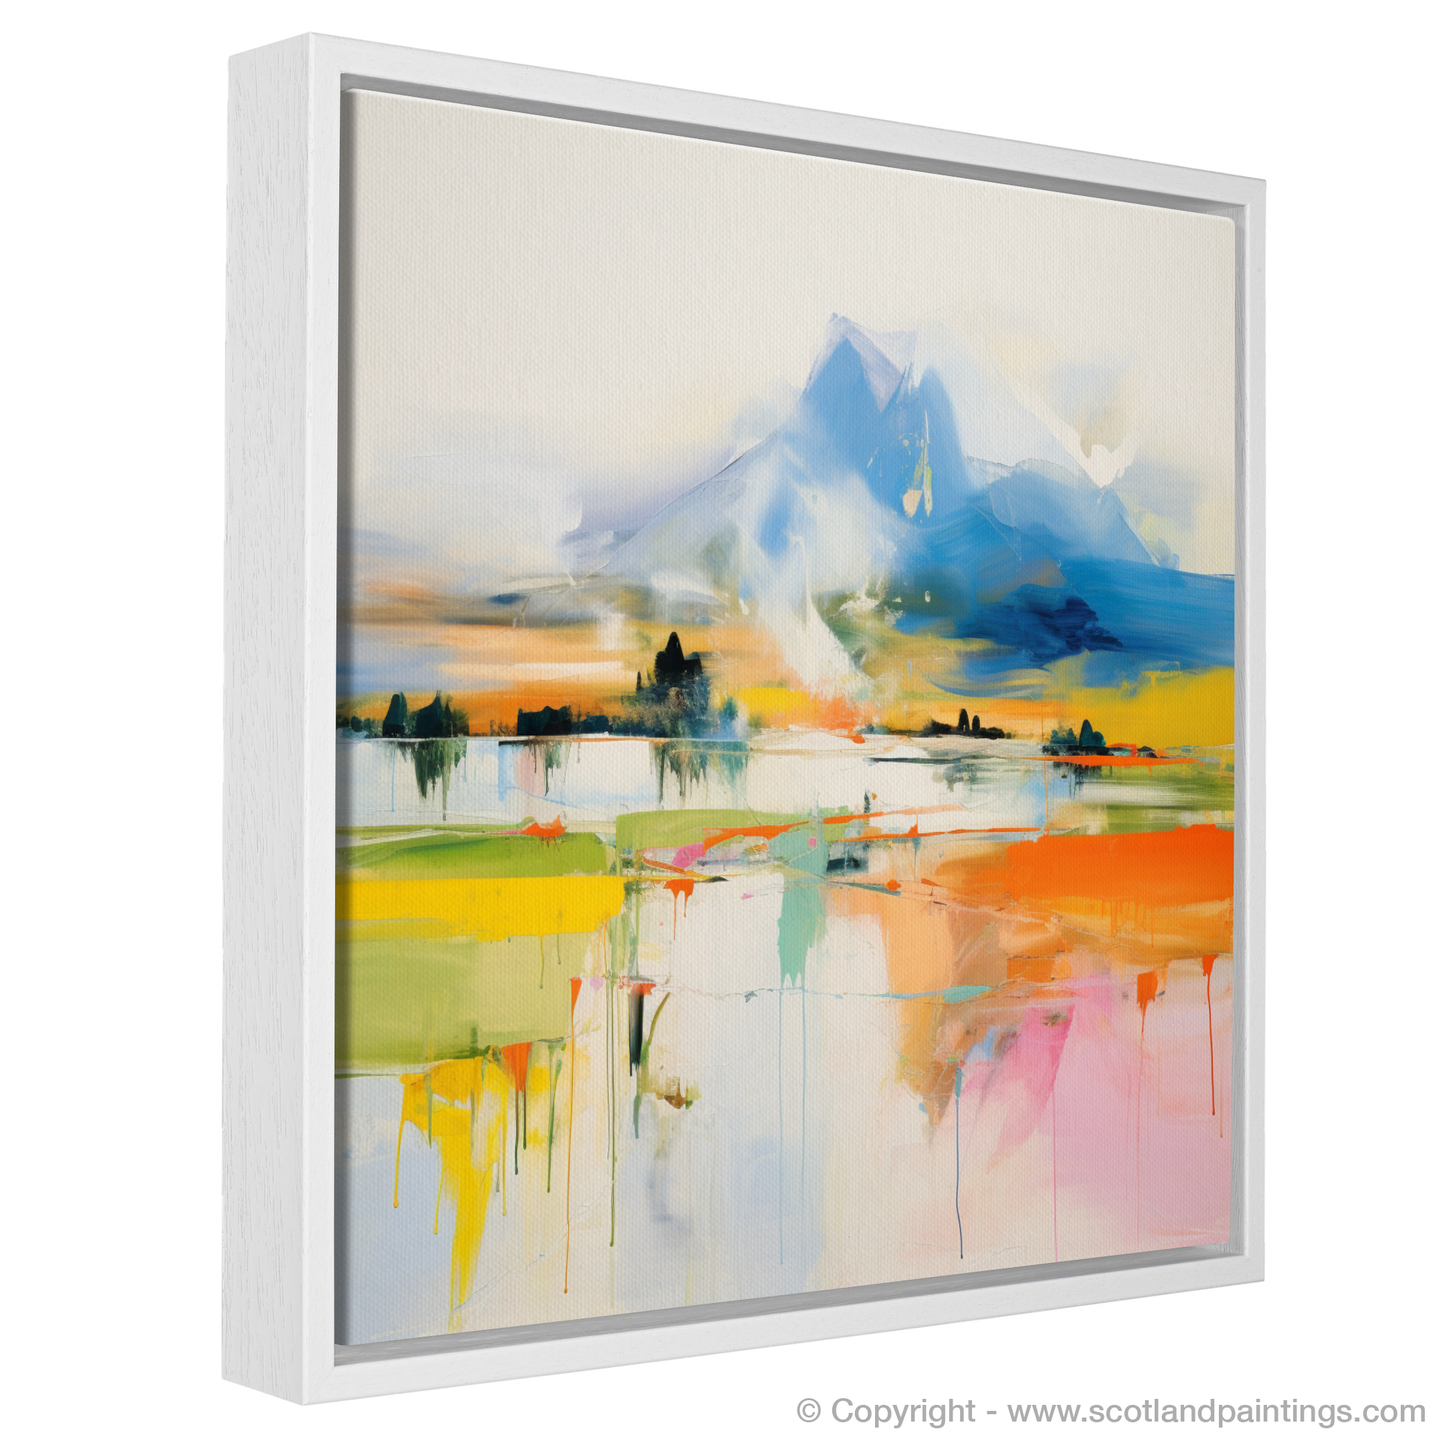 Painting and Art Print of Loch Awe, Argyll and Bute in summer entitled "Summer Symphony: Loch Awe in Abstract".